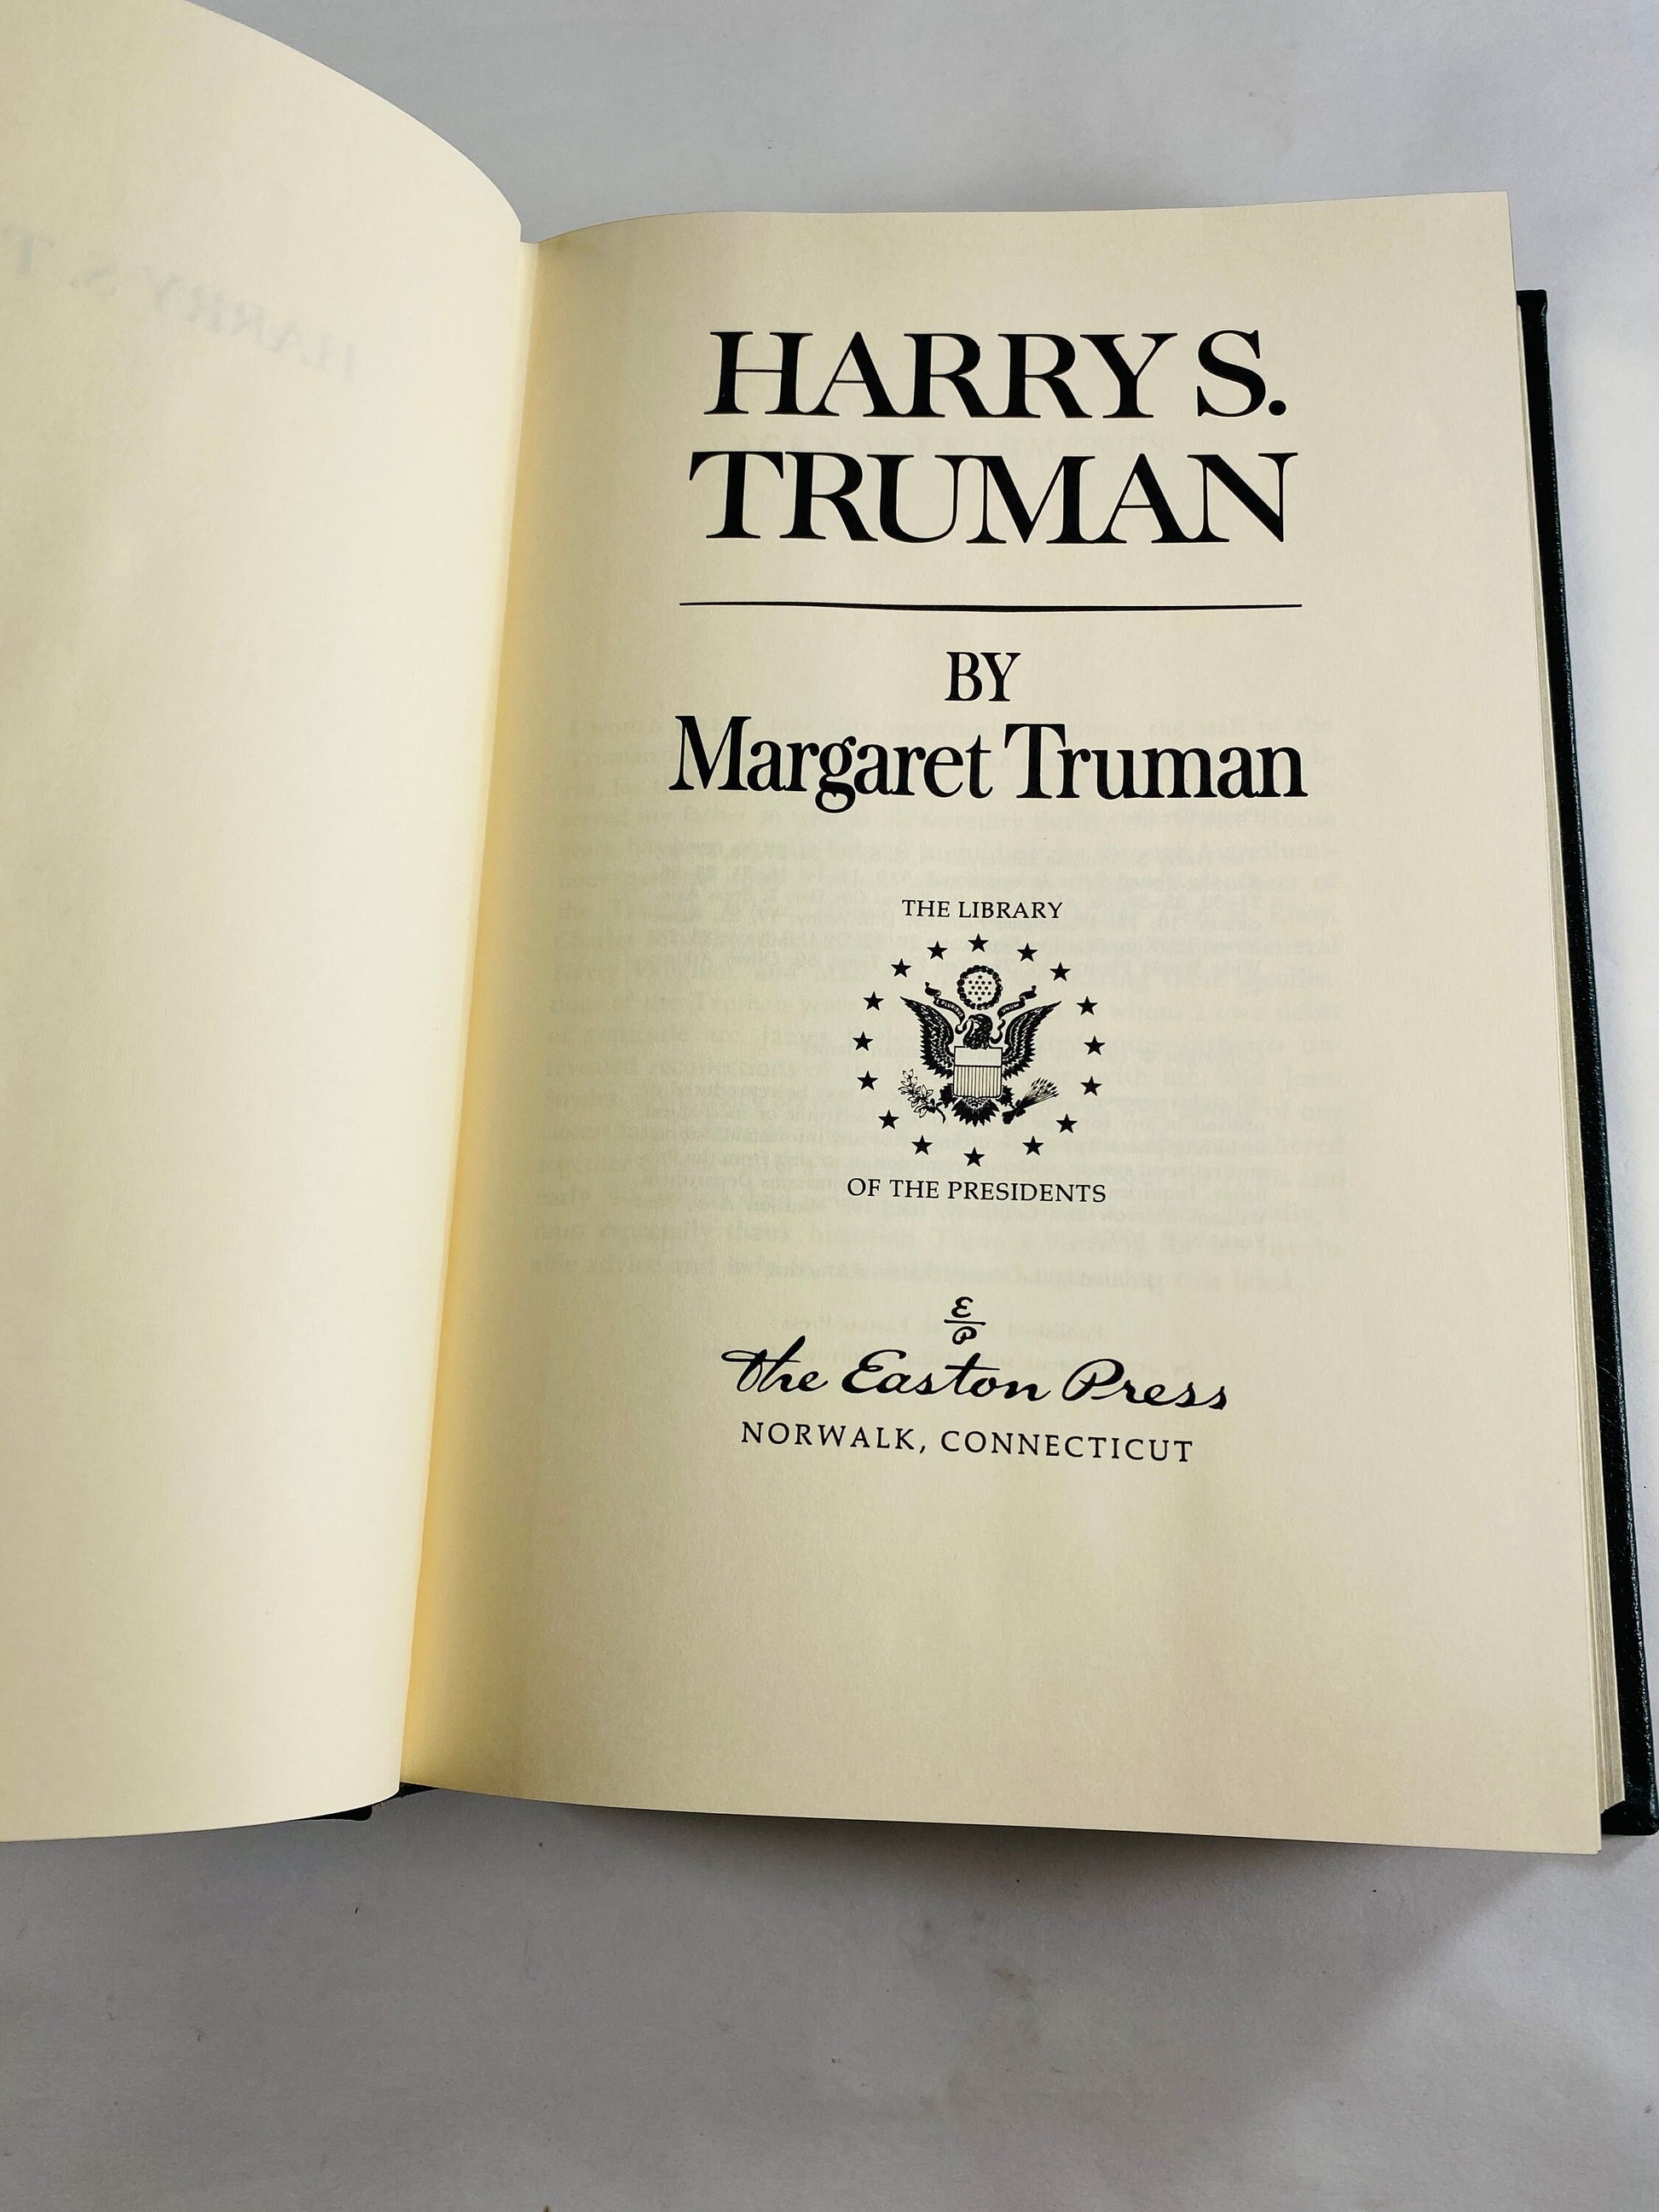 Harry S Truman GORGEOUS vintage leather Easton Press book by his daughter Margaret vintage book of former US President circa World War 2